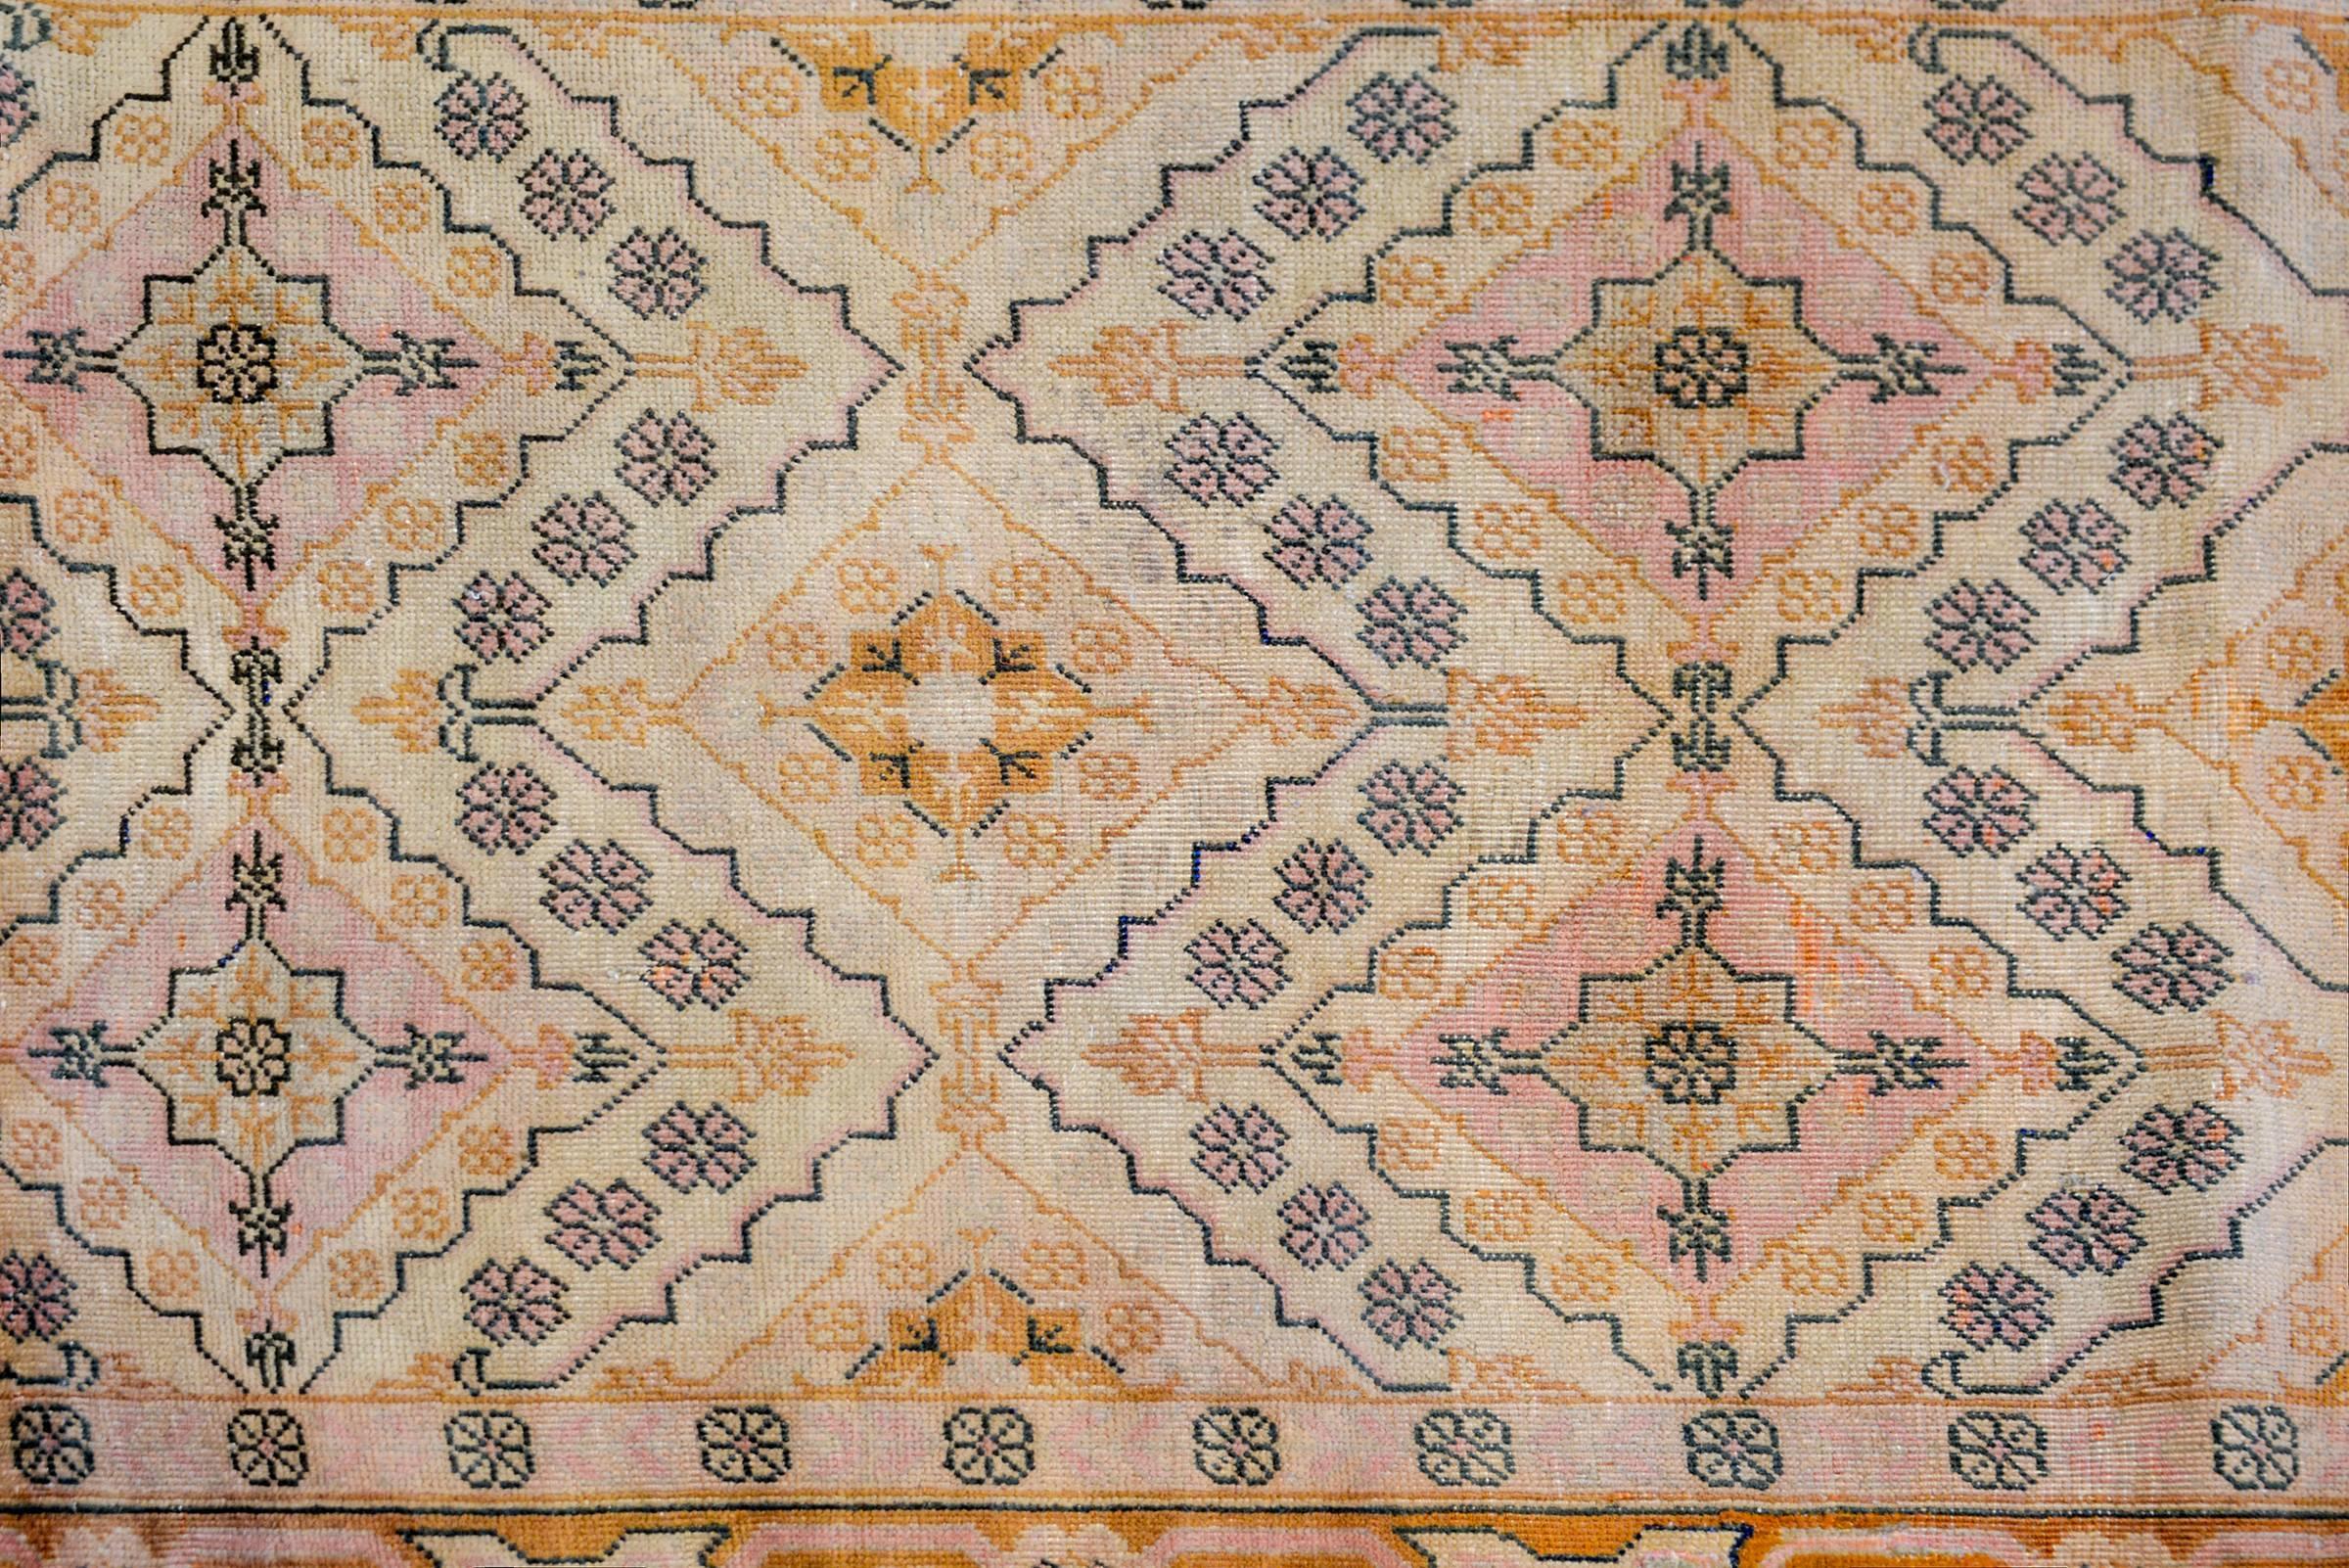 A wonderful early 20th century Central Asian Khotan rug with a beautiful all-over pattern with alternating diamonds and flowers creating a great zigzag pattern across the field, woven in pink, gold, natural undyed wool, and outlined in black. The